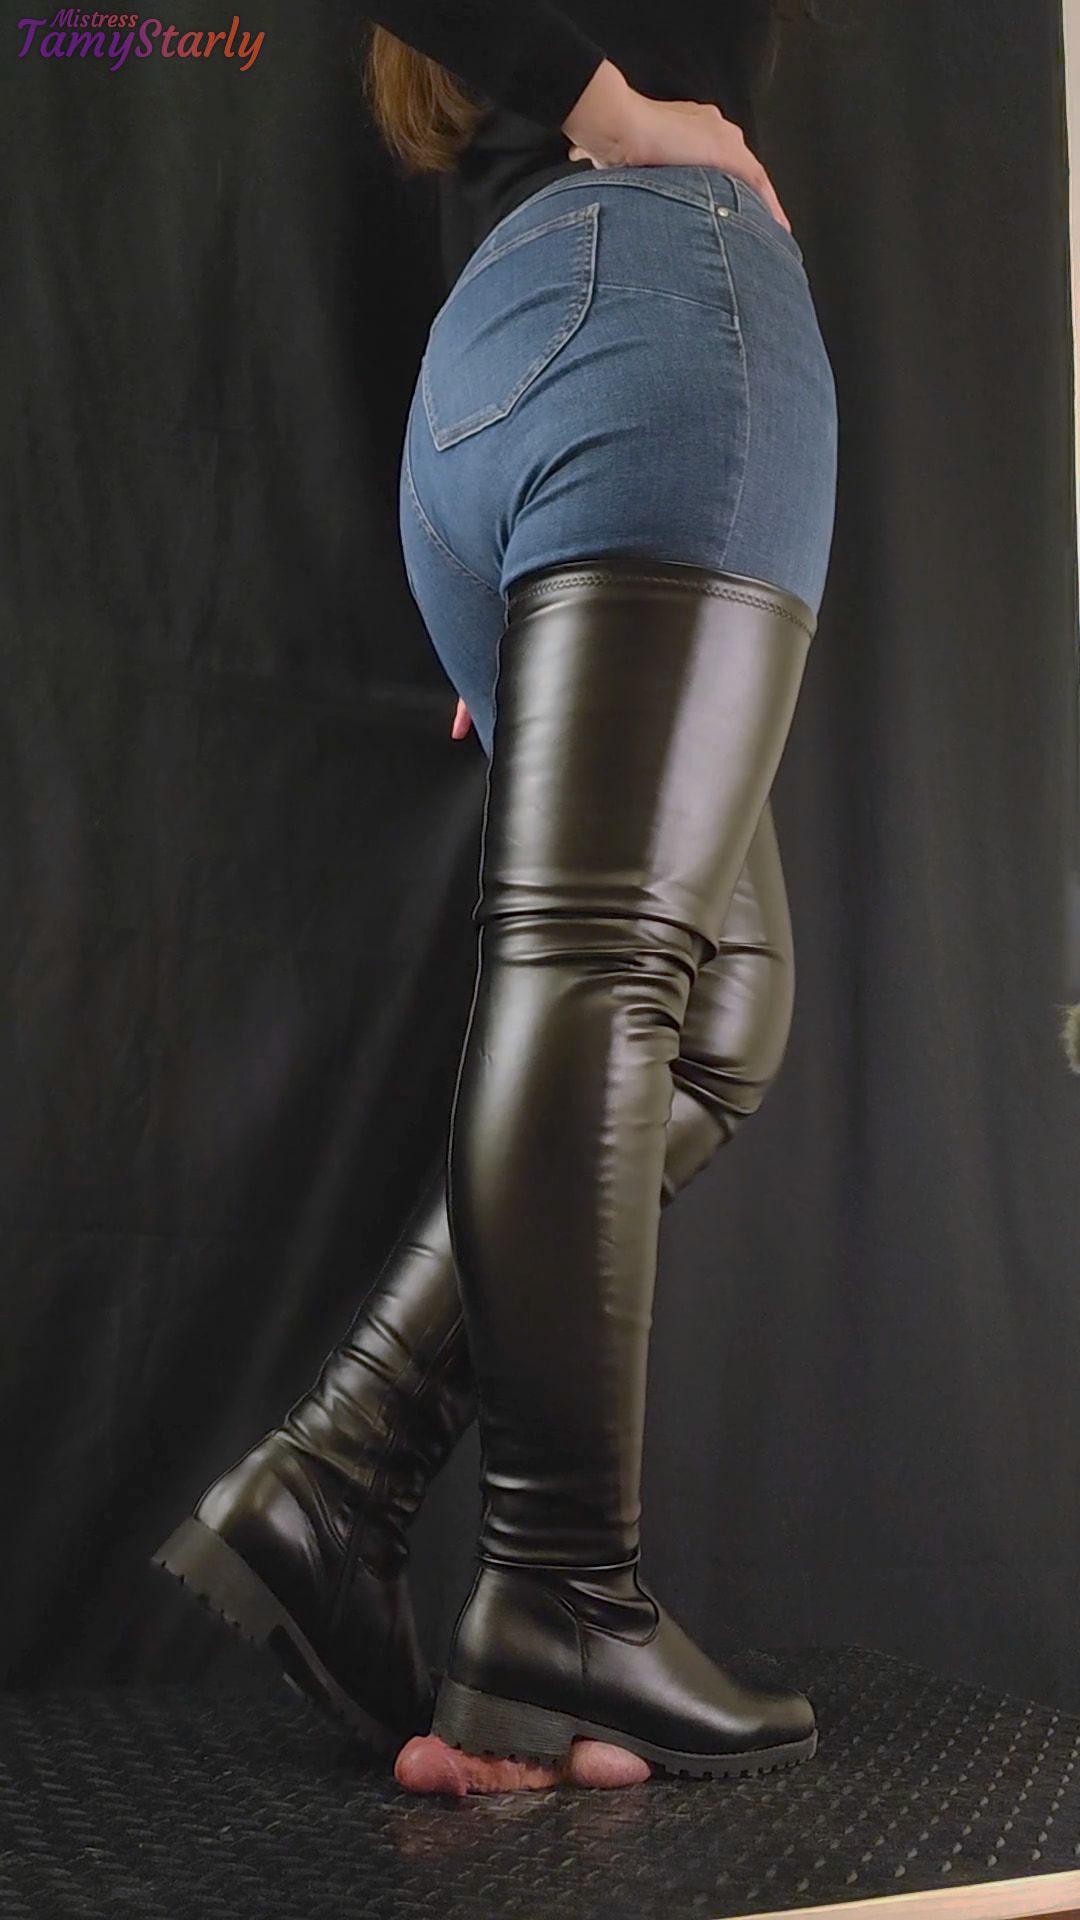 March & Blast in Super Thigh Boots - Ball Stomp, Bootjob #16